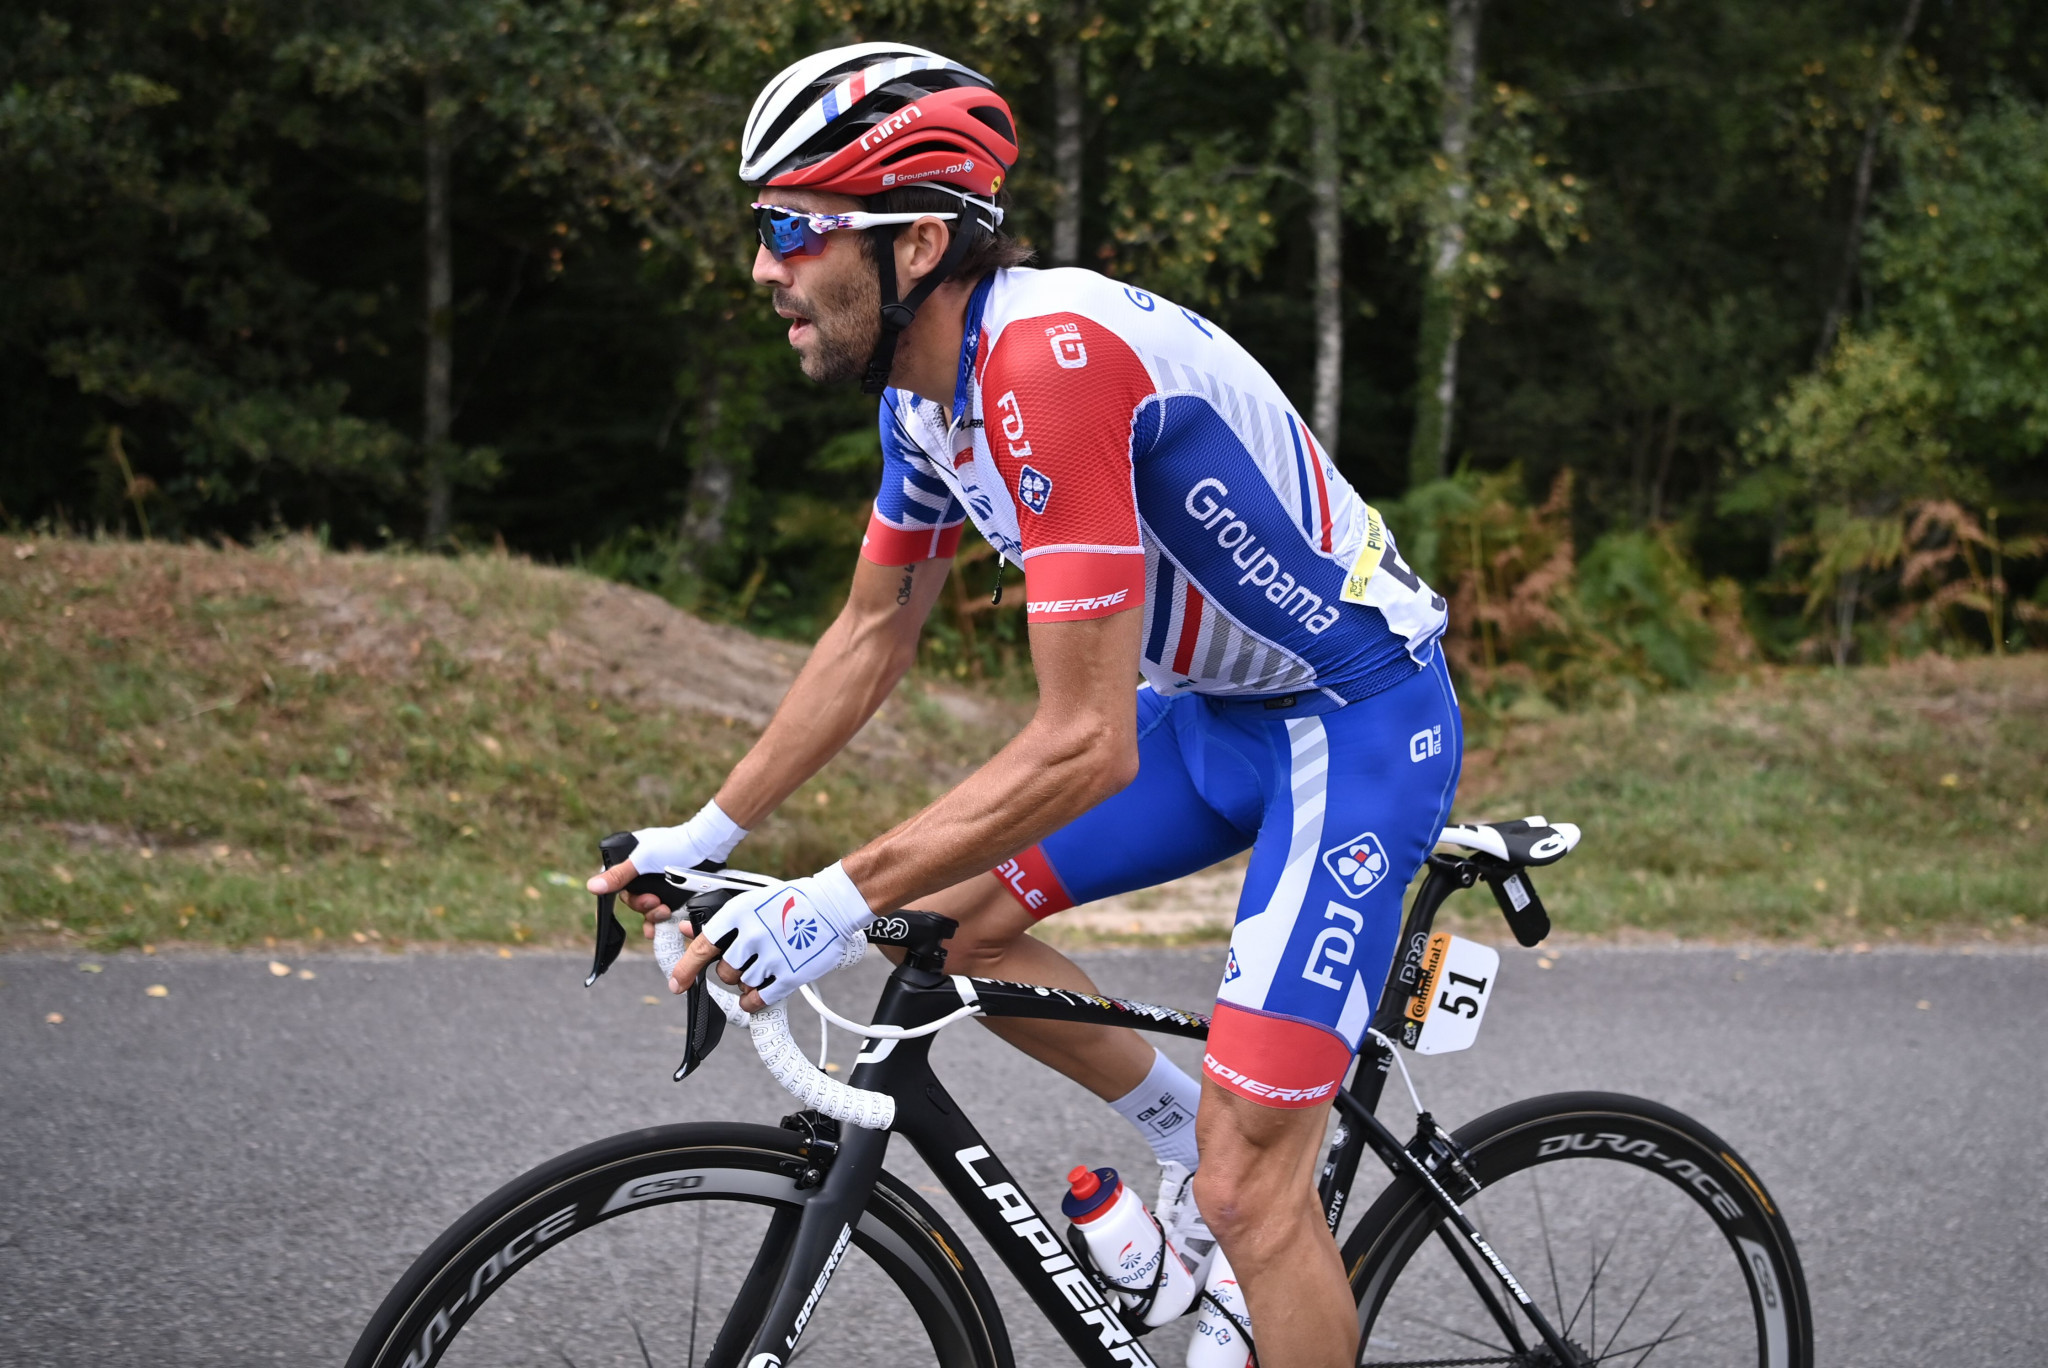 France's Thibaut Pinot could not make up time in the general classification as the yellow jersey looks out of reach ©Getty Images